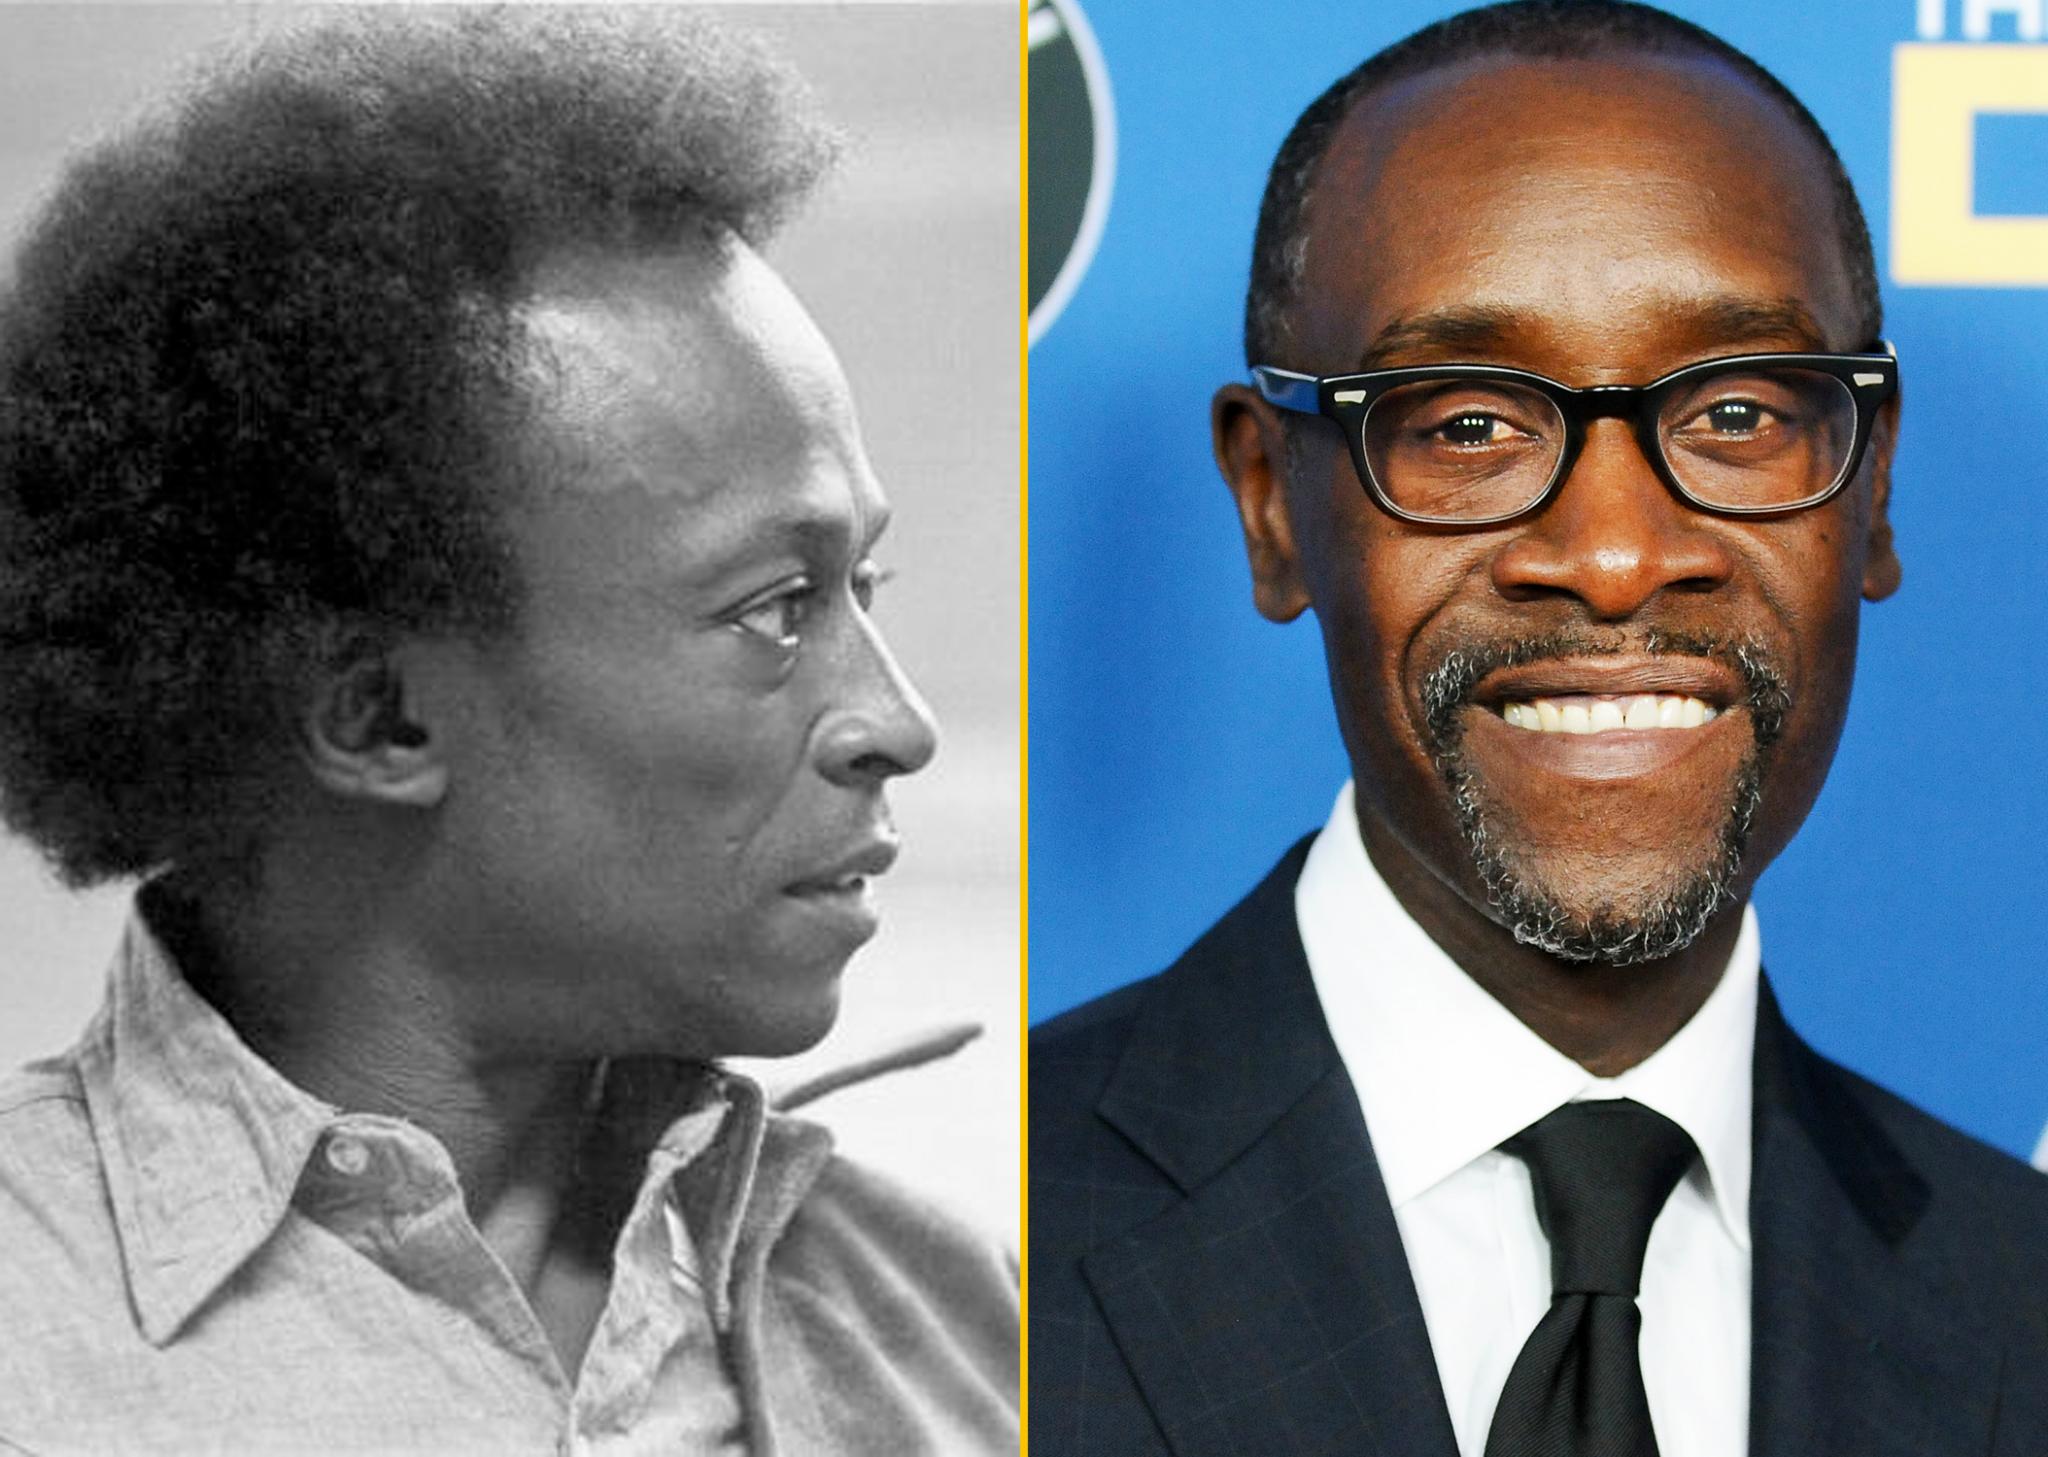 Miles Davis' Family on Wanting Don Cheadle to Portray the Legendary Musician